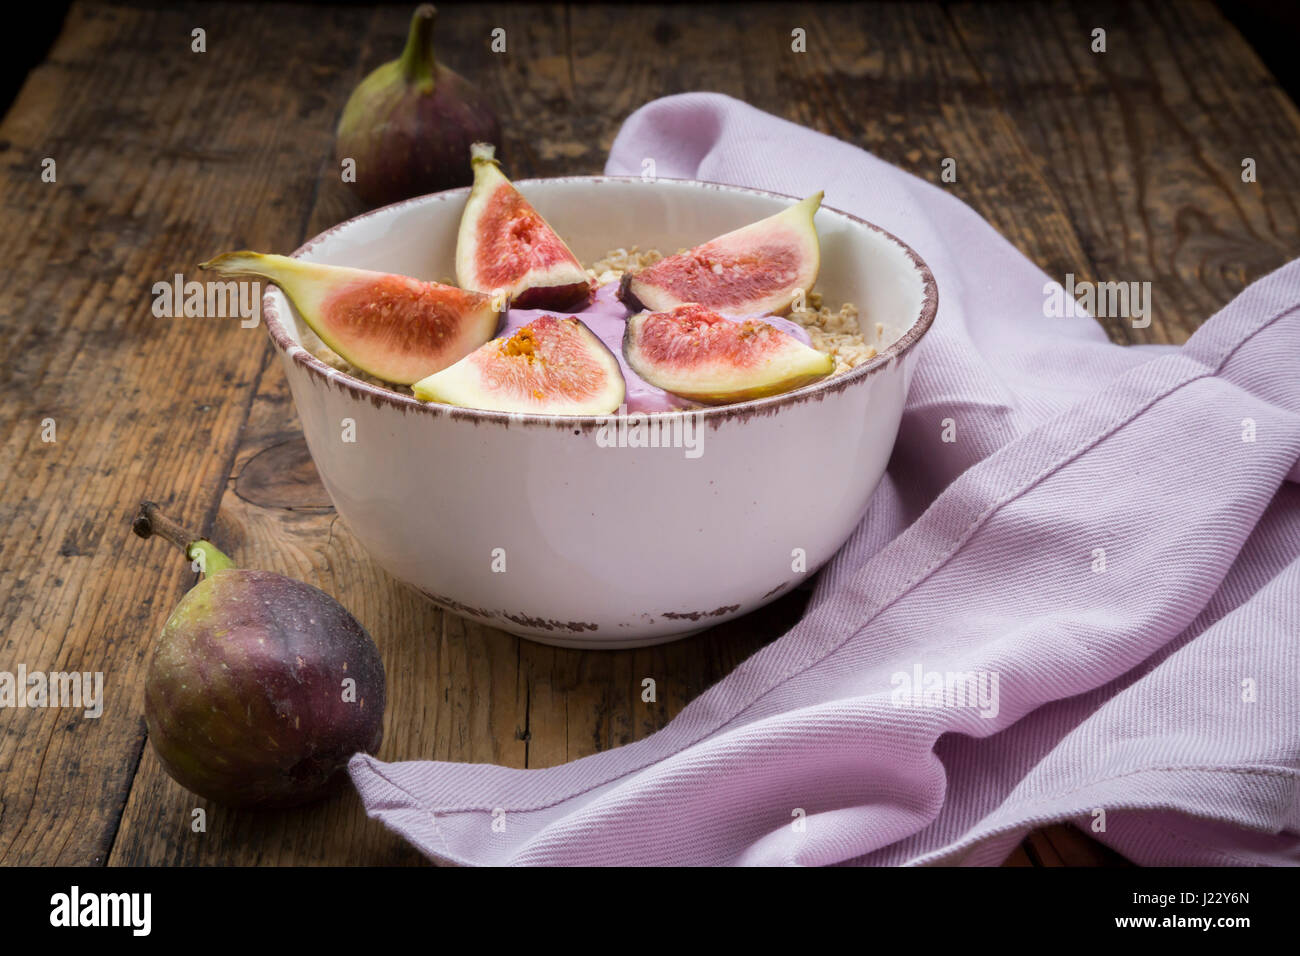 Bowl of overnight oats with blueberry yoghurt and figs on wood Stock Photo